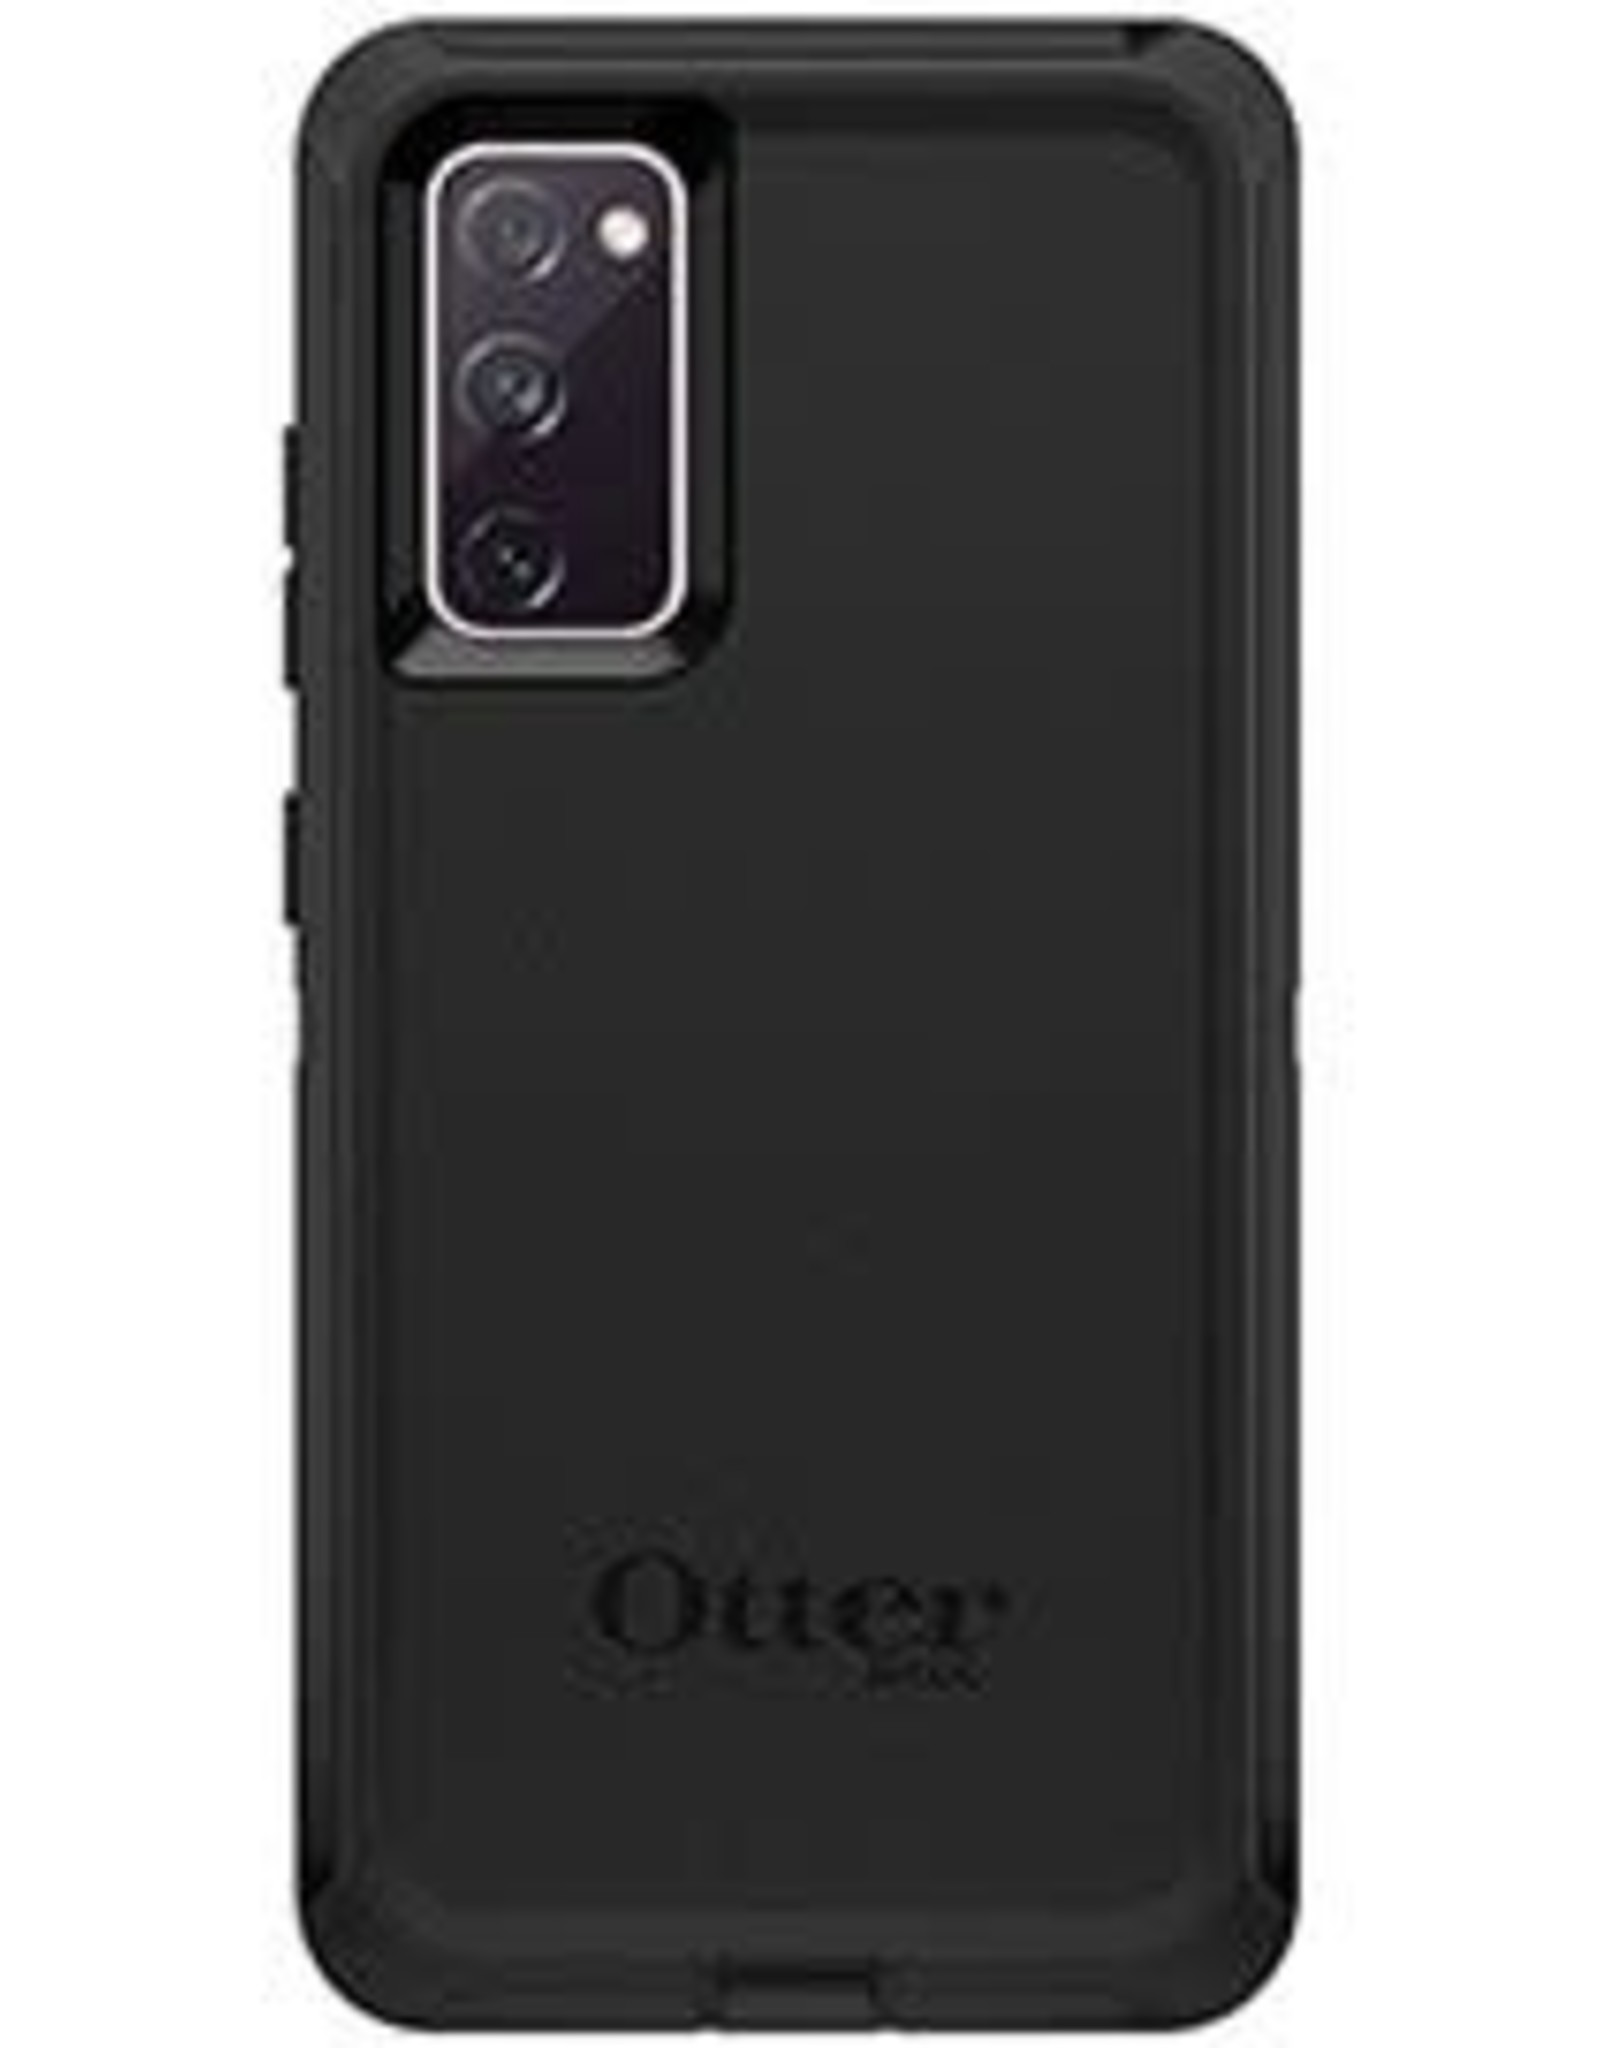 OtterBox OtterBox DEFENDER SERIES SCREENLESS EDITION Case for Samsung